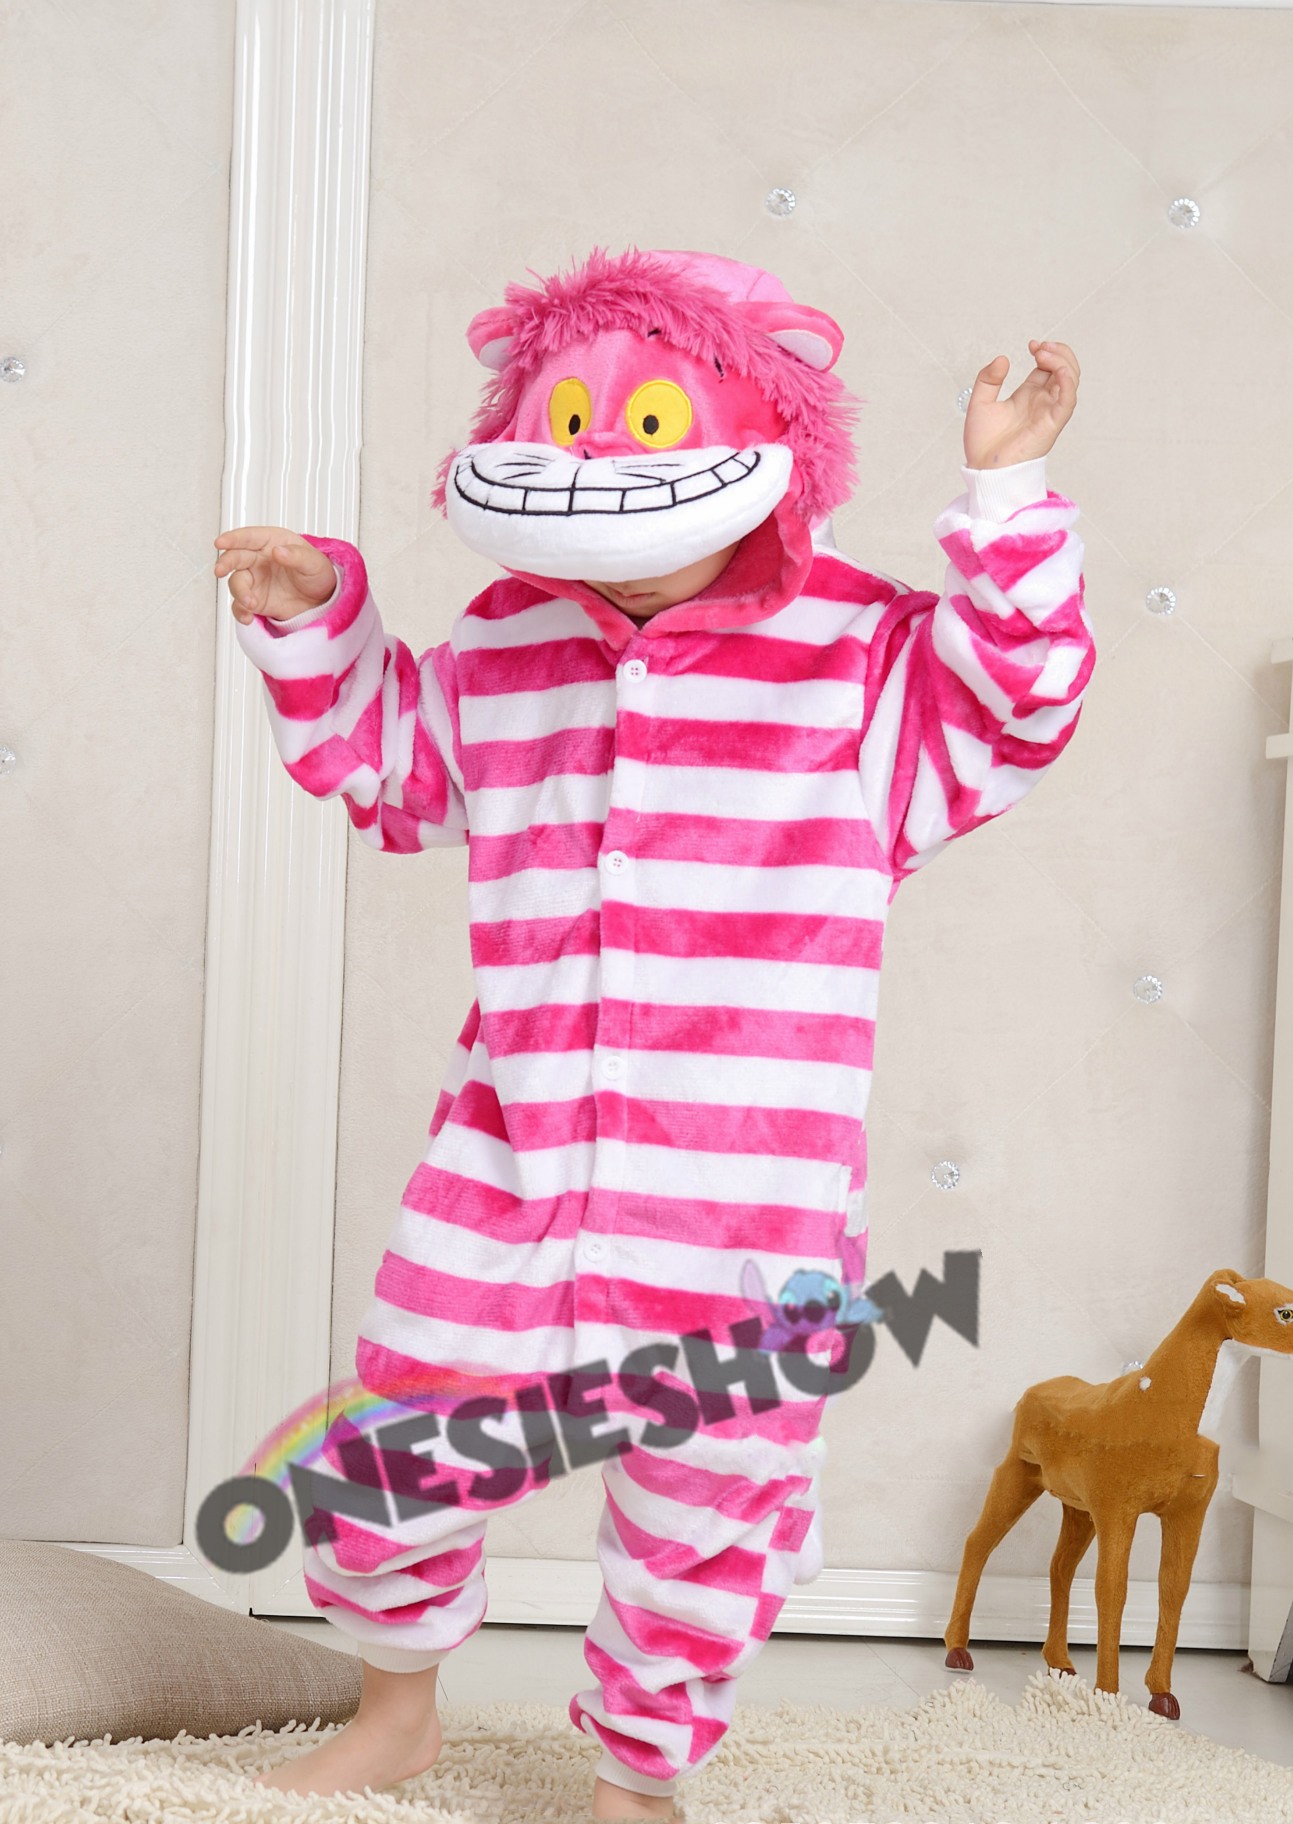 47 Top Images Onesie Pajamas For Cats : Tabby Cat Onesie, Tabby Cat Pajamas For Women & Men Online ...